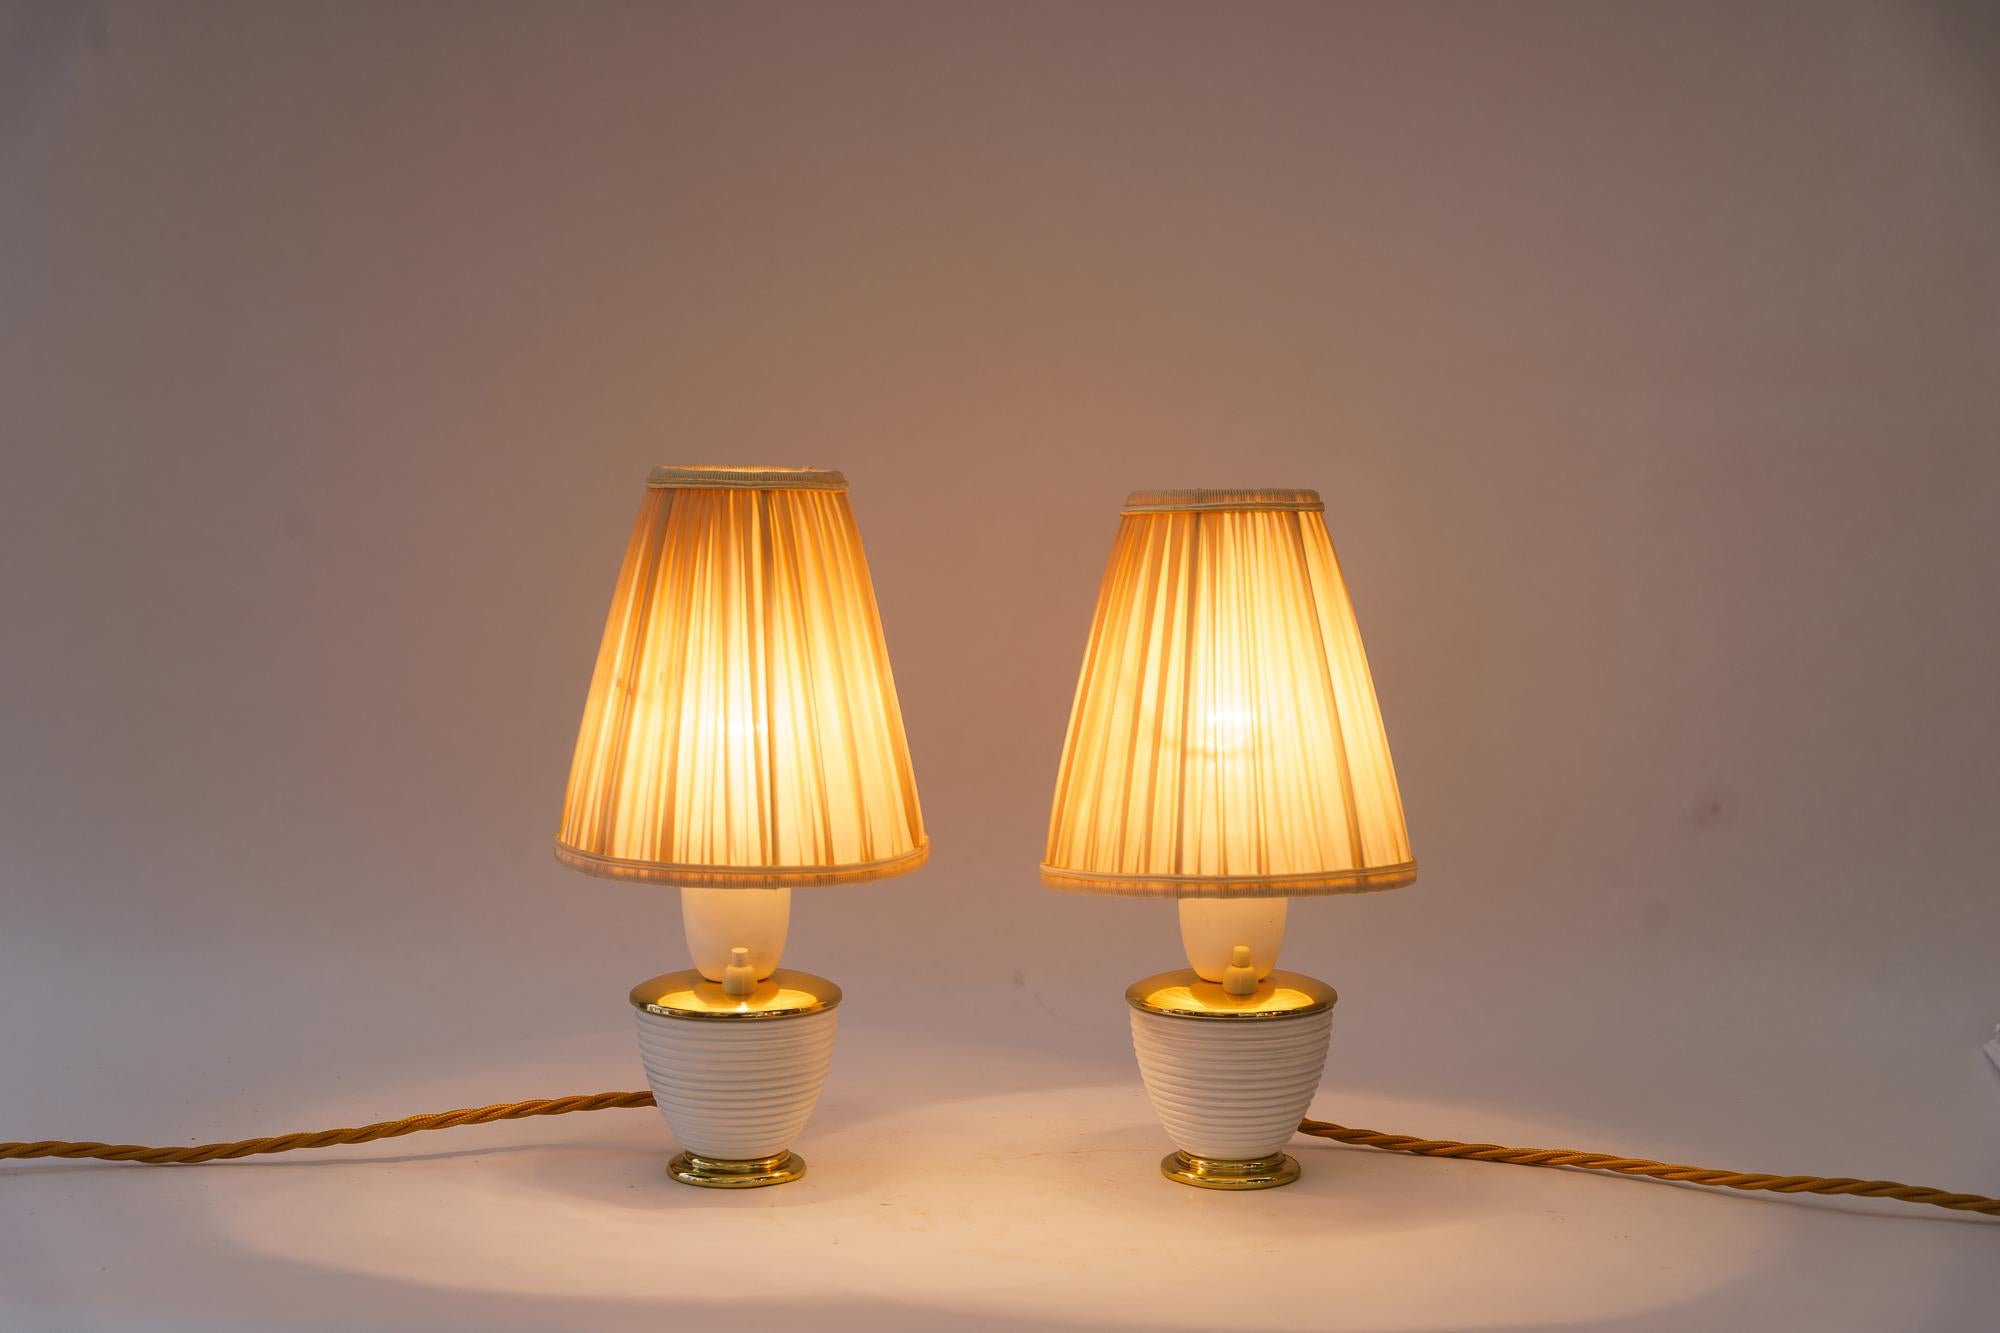 2 Rupert Nikoll table lamps with fabric shades vienna around 1950s
The Fabric shade is replaced ( new )
Polished and stove enameled